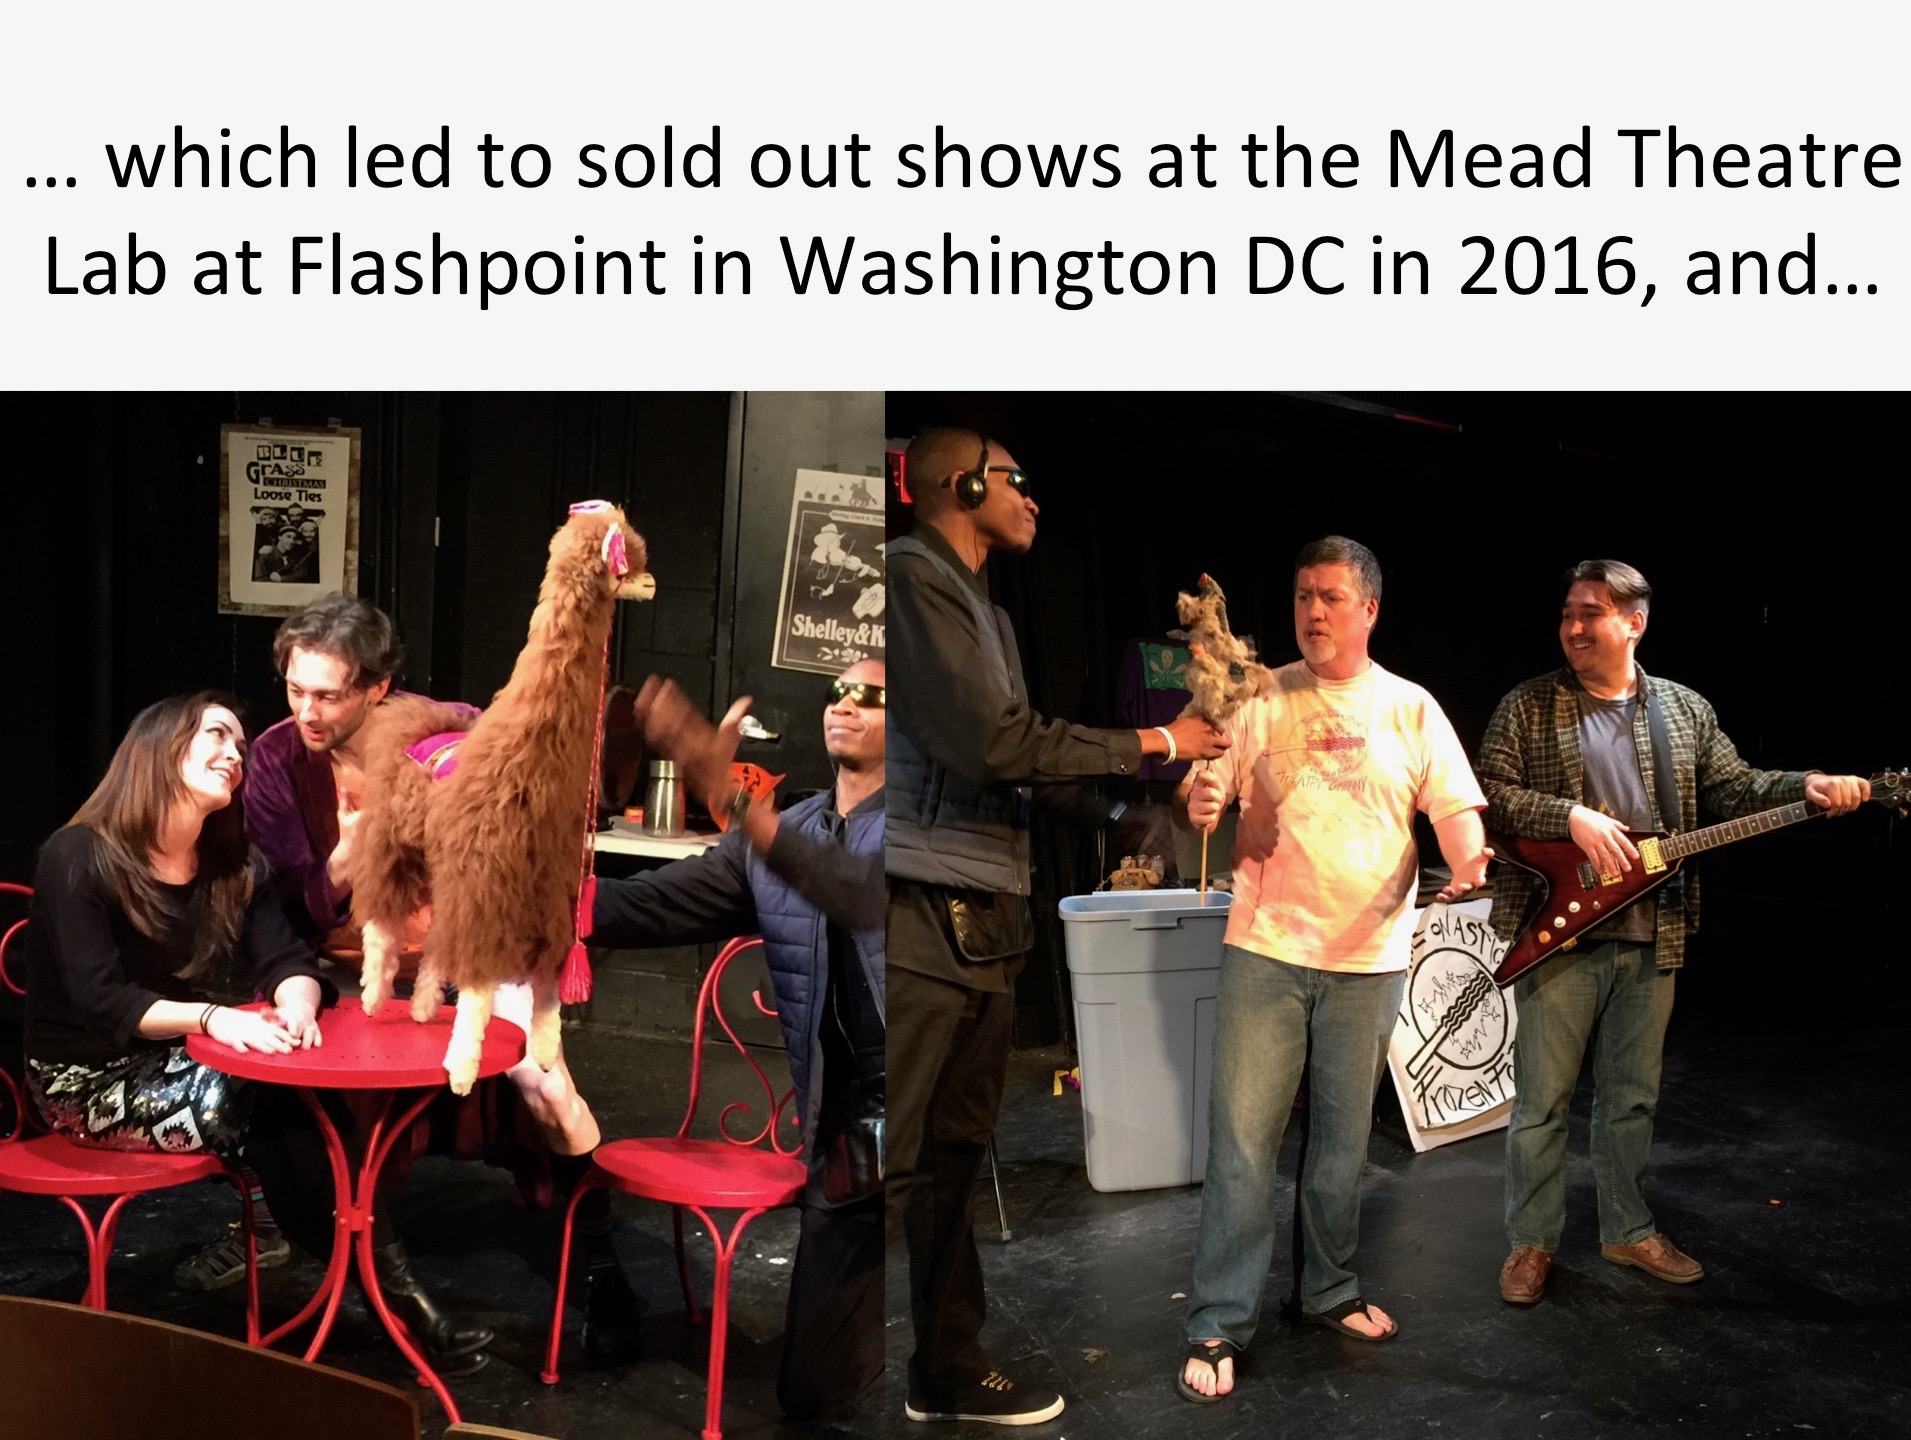 Photos showing the cast and key props such as a llama and a roadkill on a stick during the world premiere run at the Mead Theatre Lab at Flashpoint in Washington DC. 